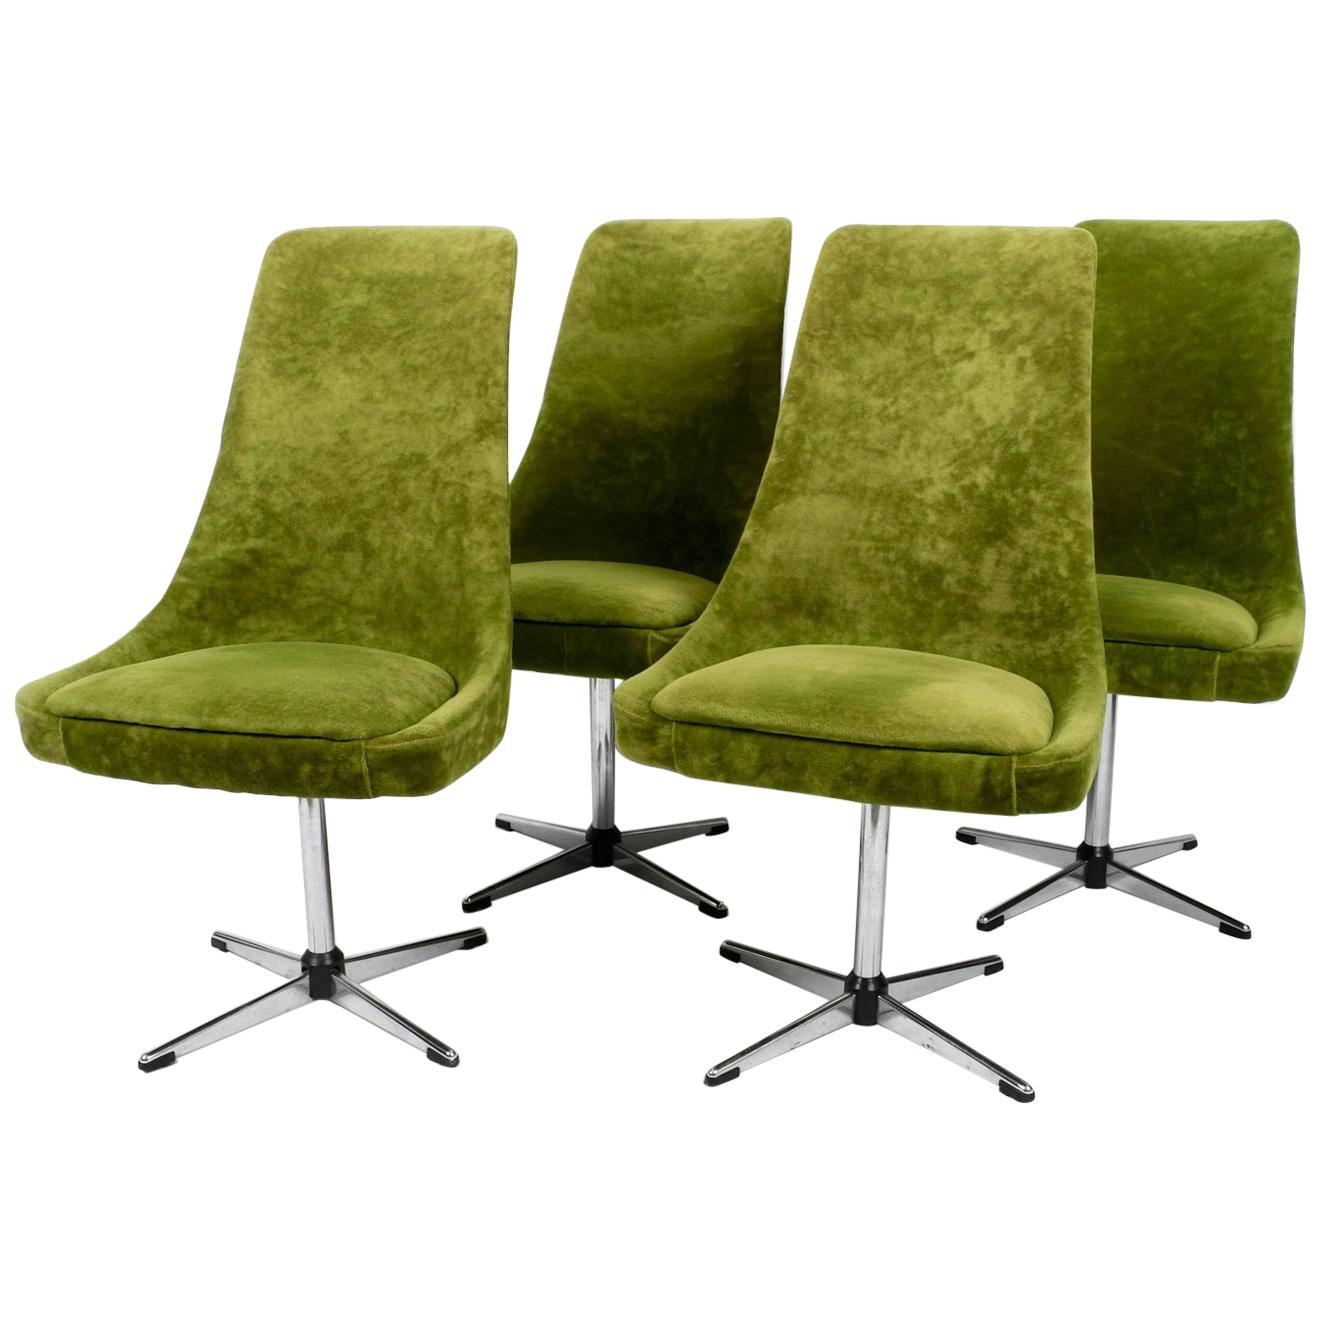 Four 1970s Space Age Rotatable Chairs by Lübke with Original Green Velvet Cover